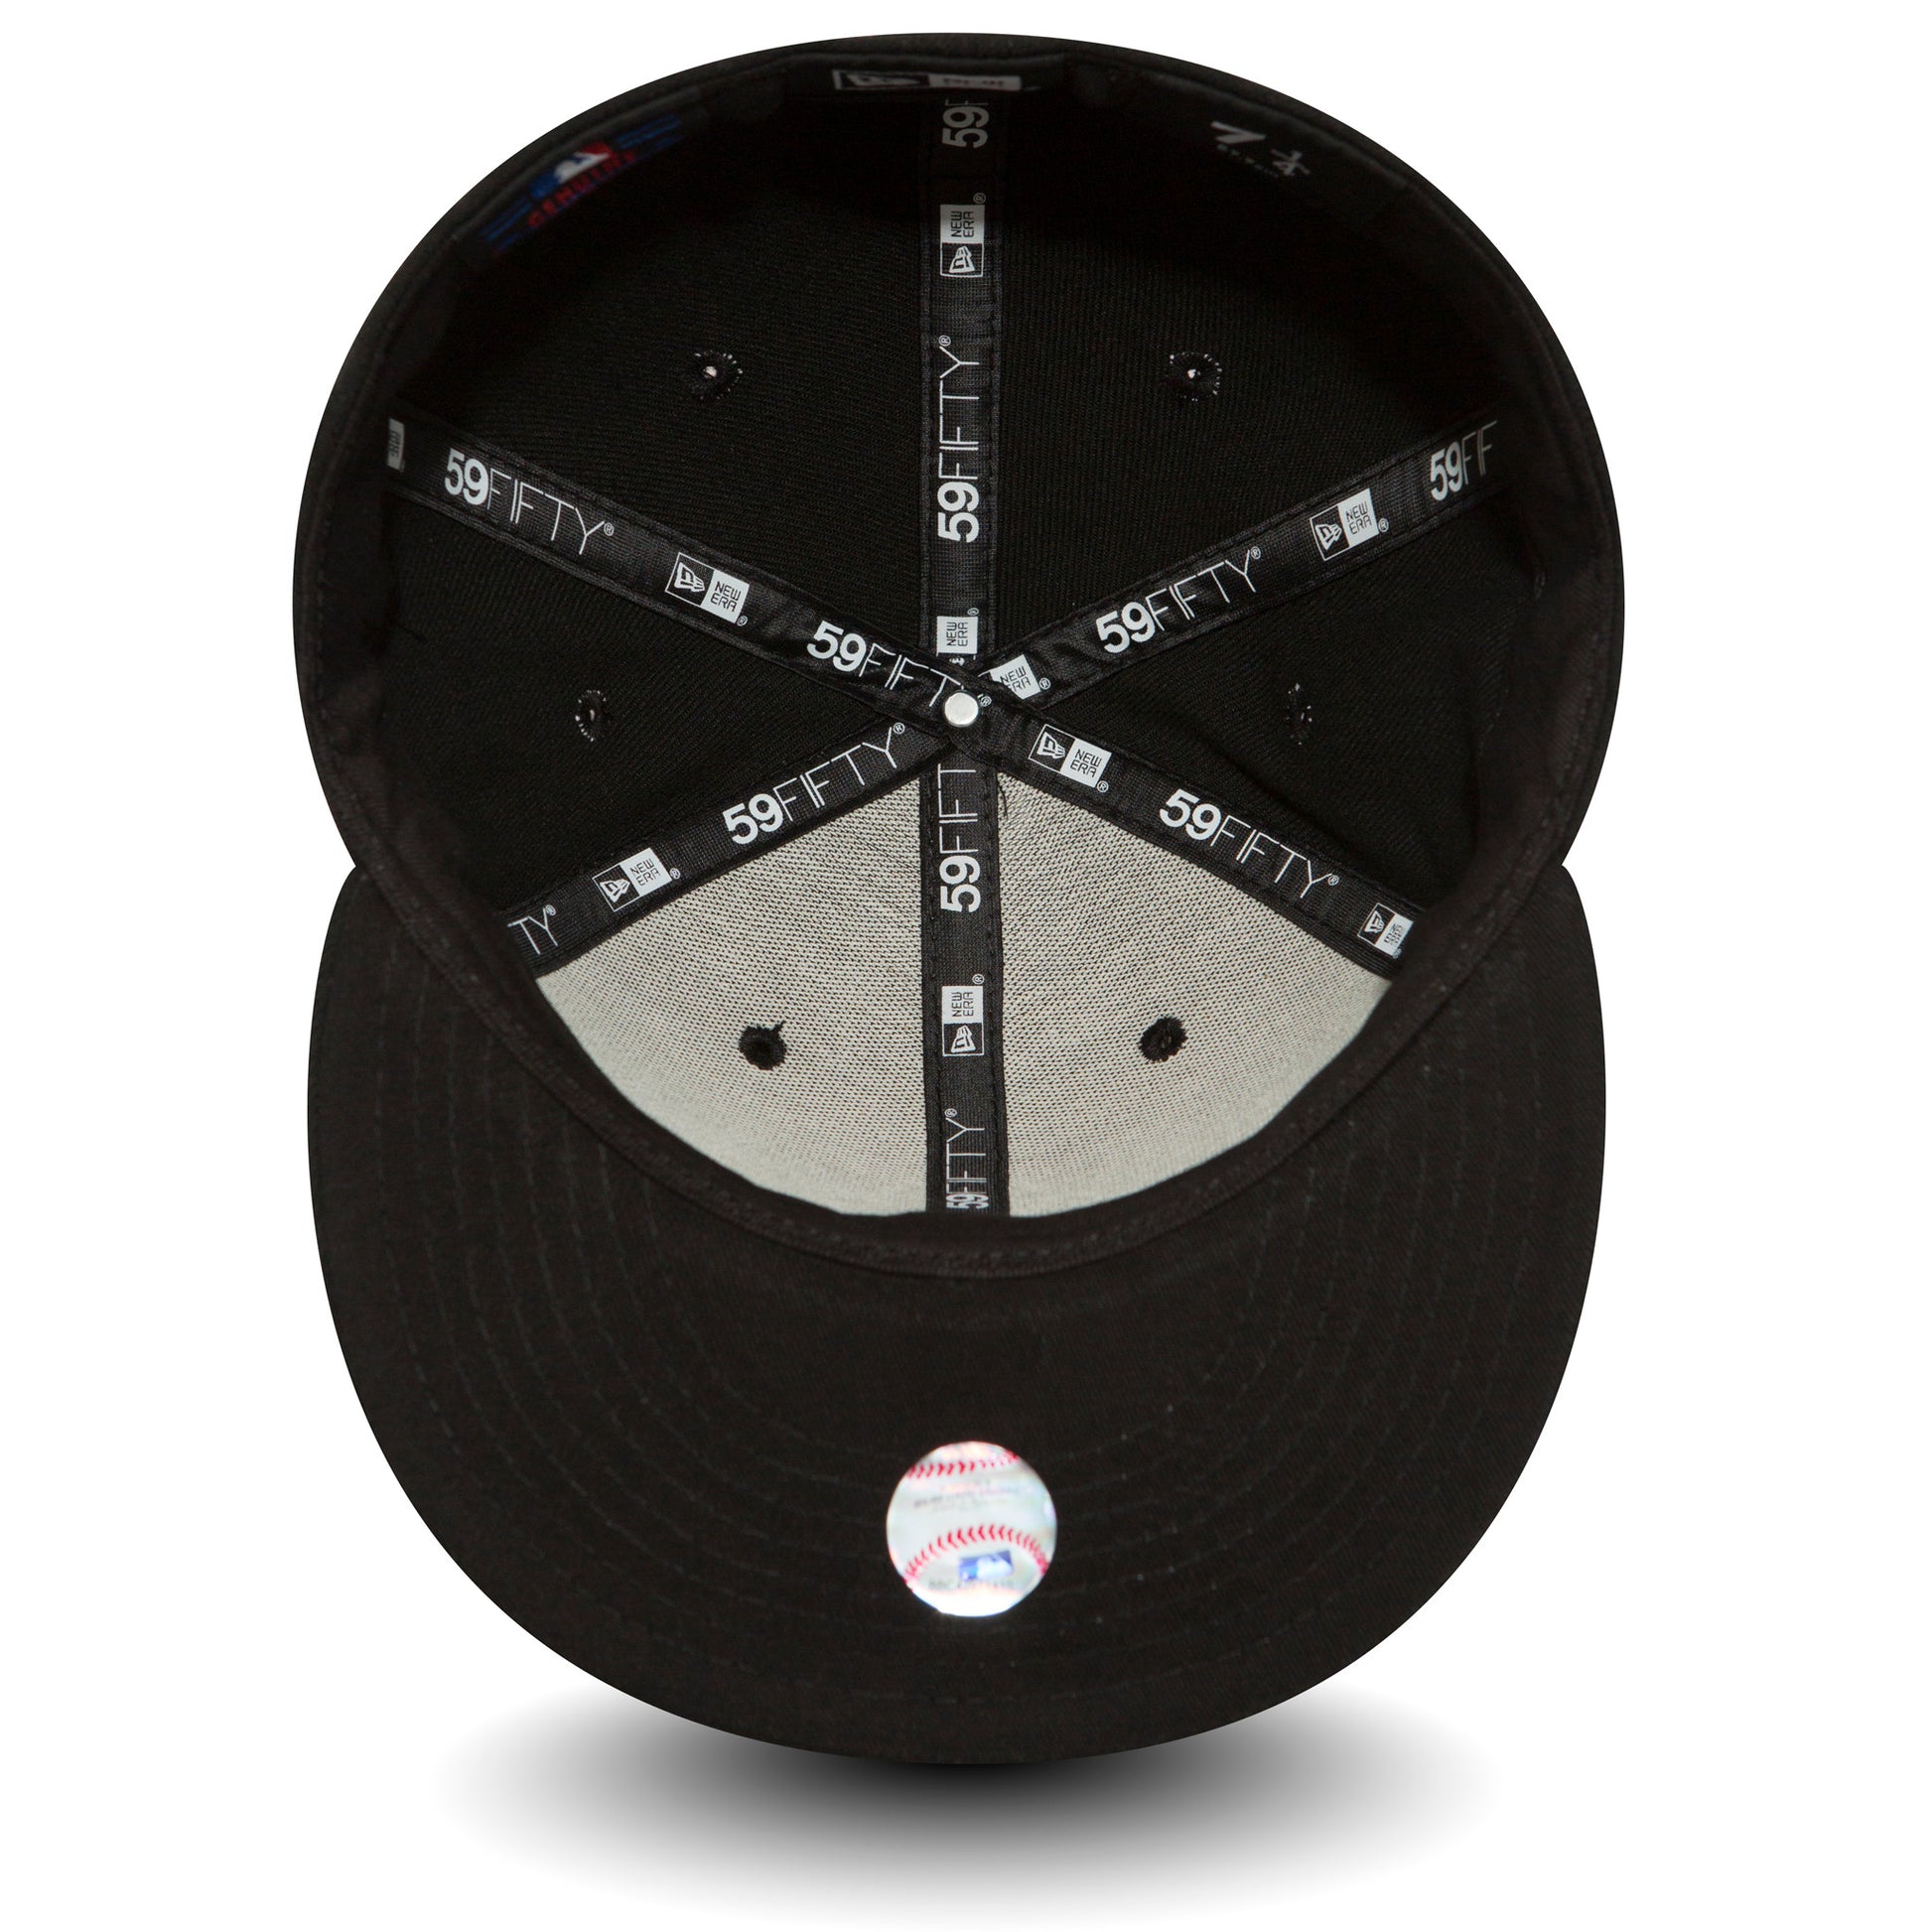 New Era - 59Fifty Fitted Cap Los Angeles Dodgers - Black On Black - Headz Up 